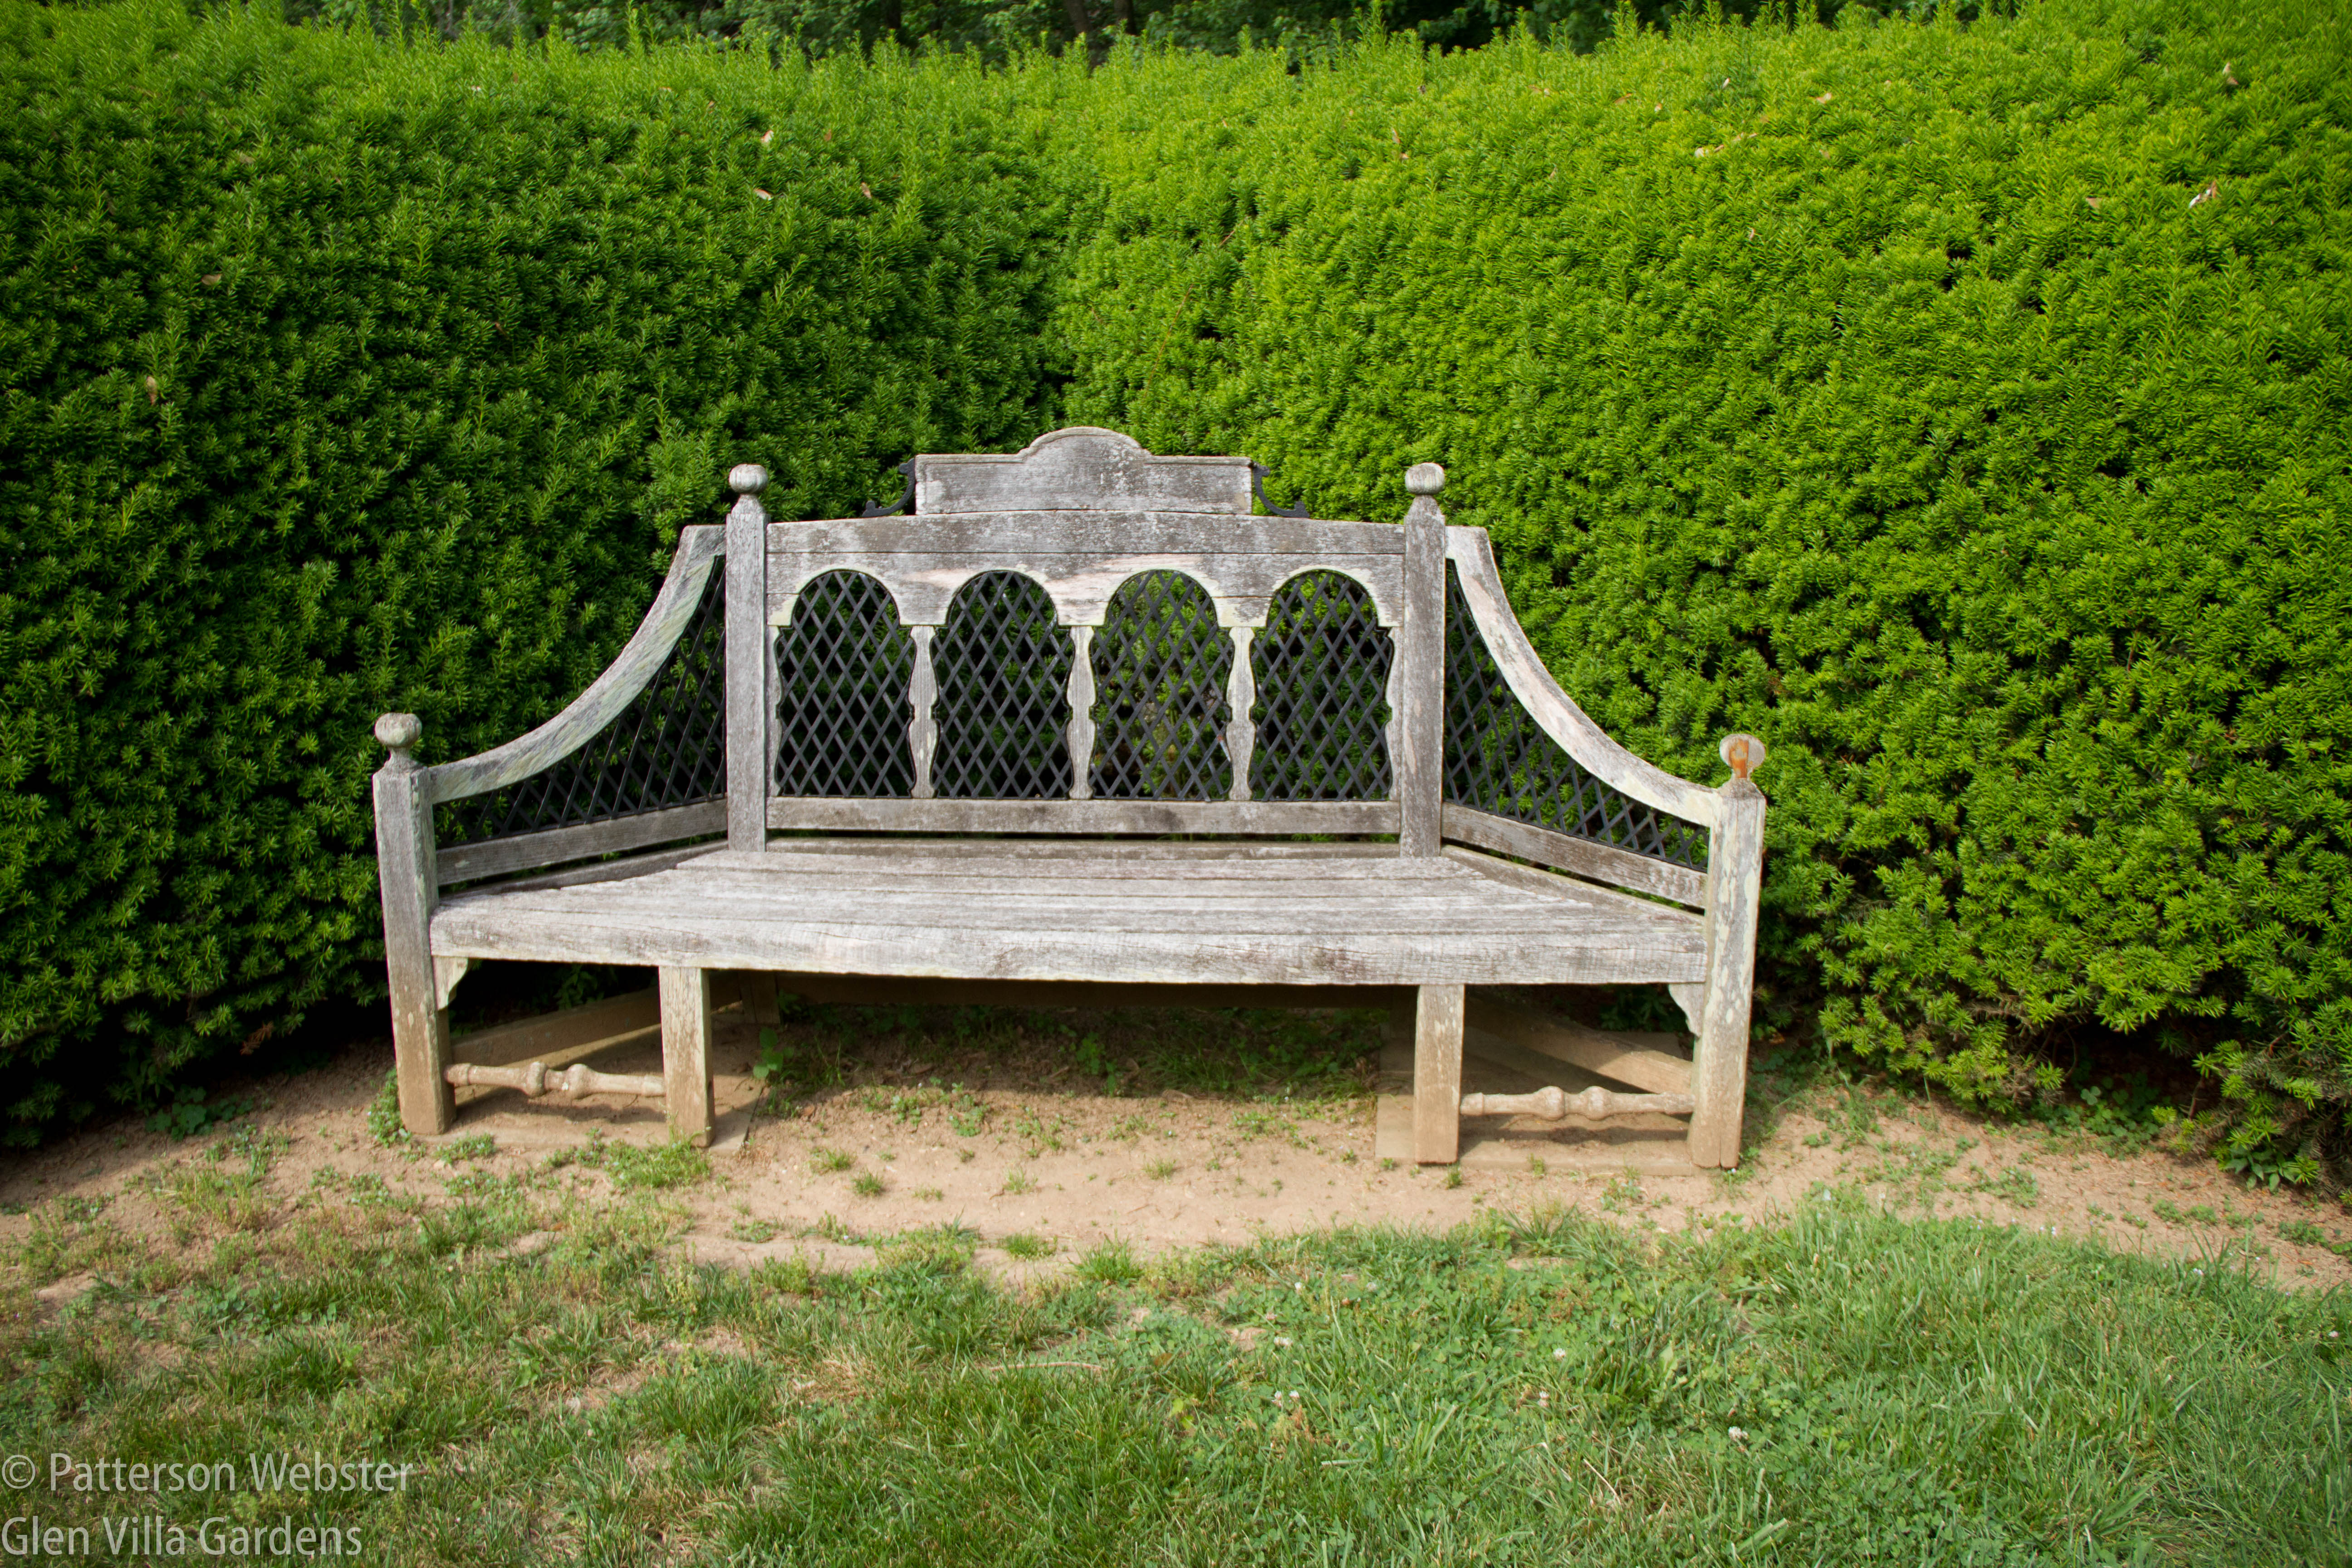 This capacious bench will easily seat three people.